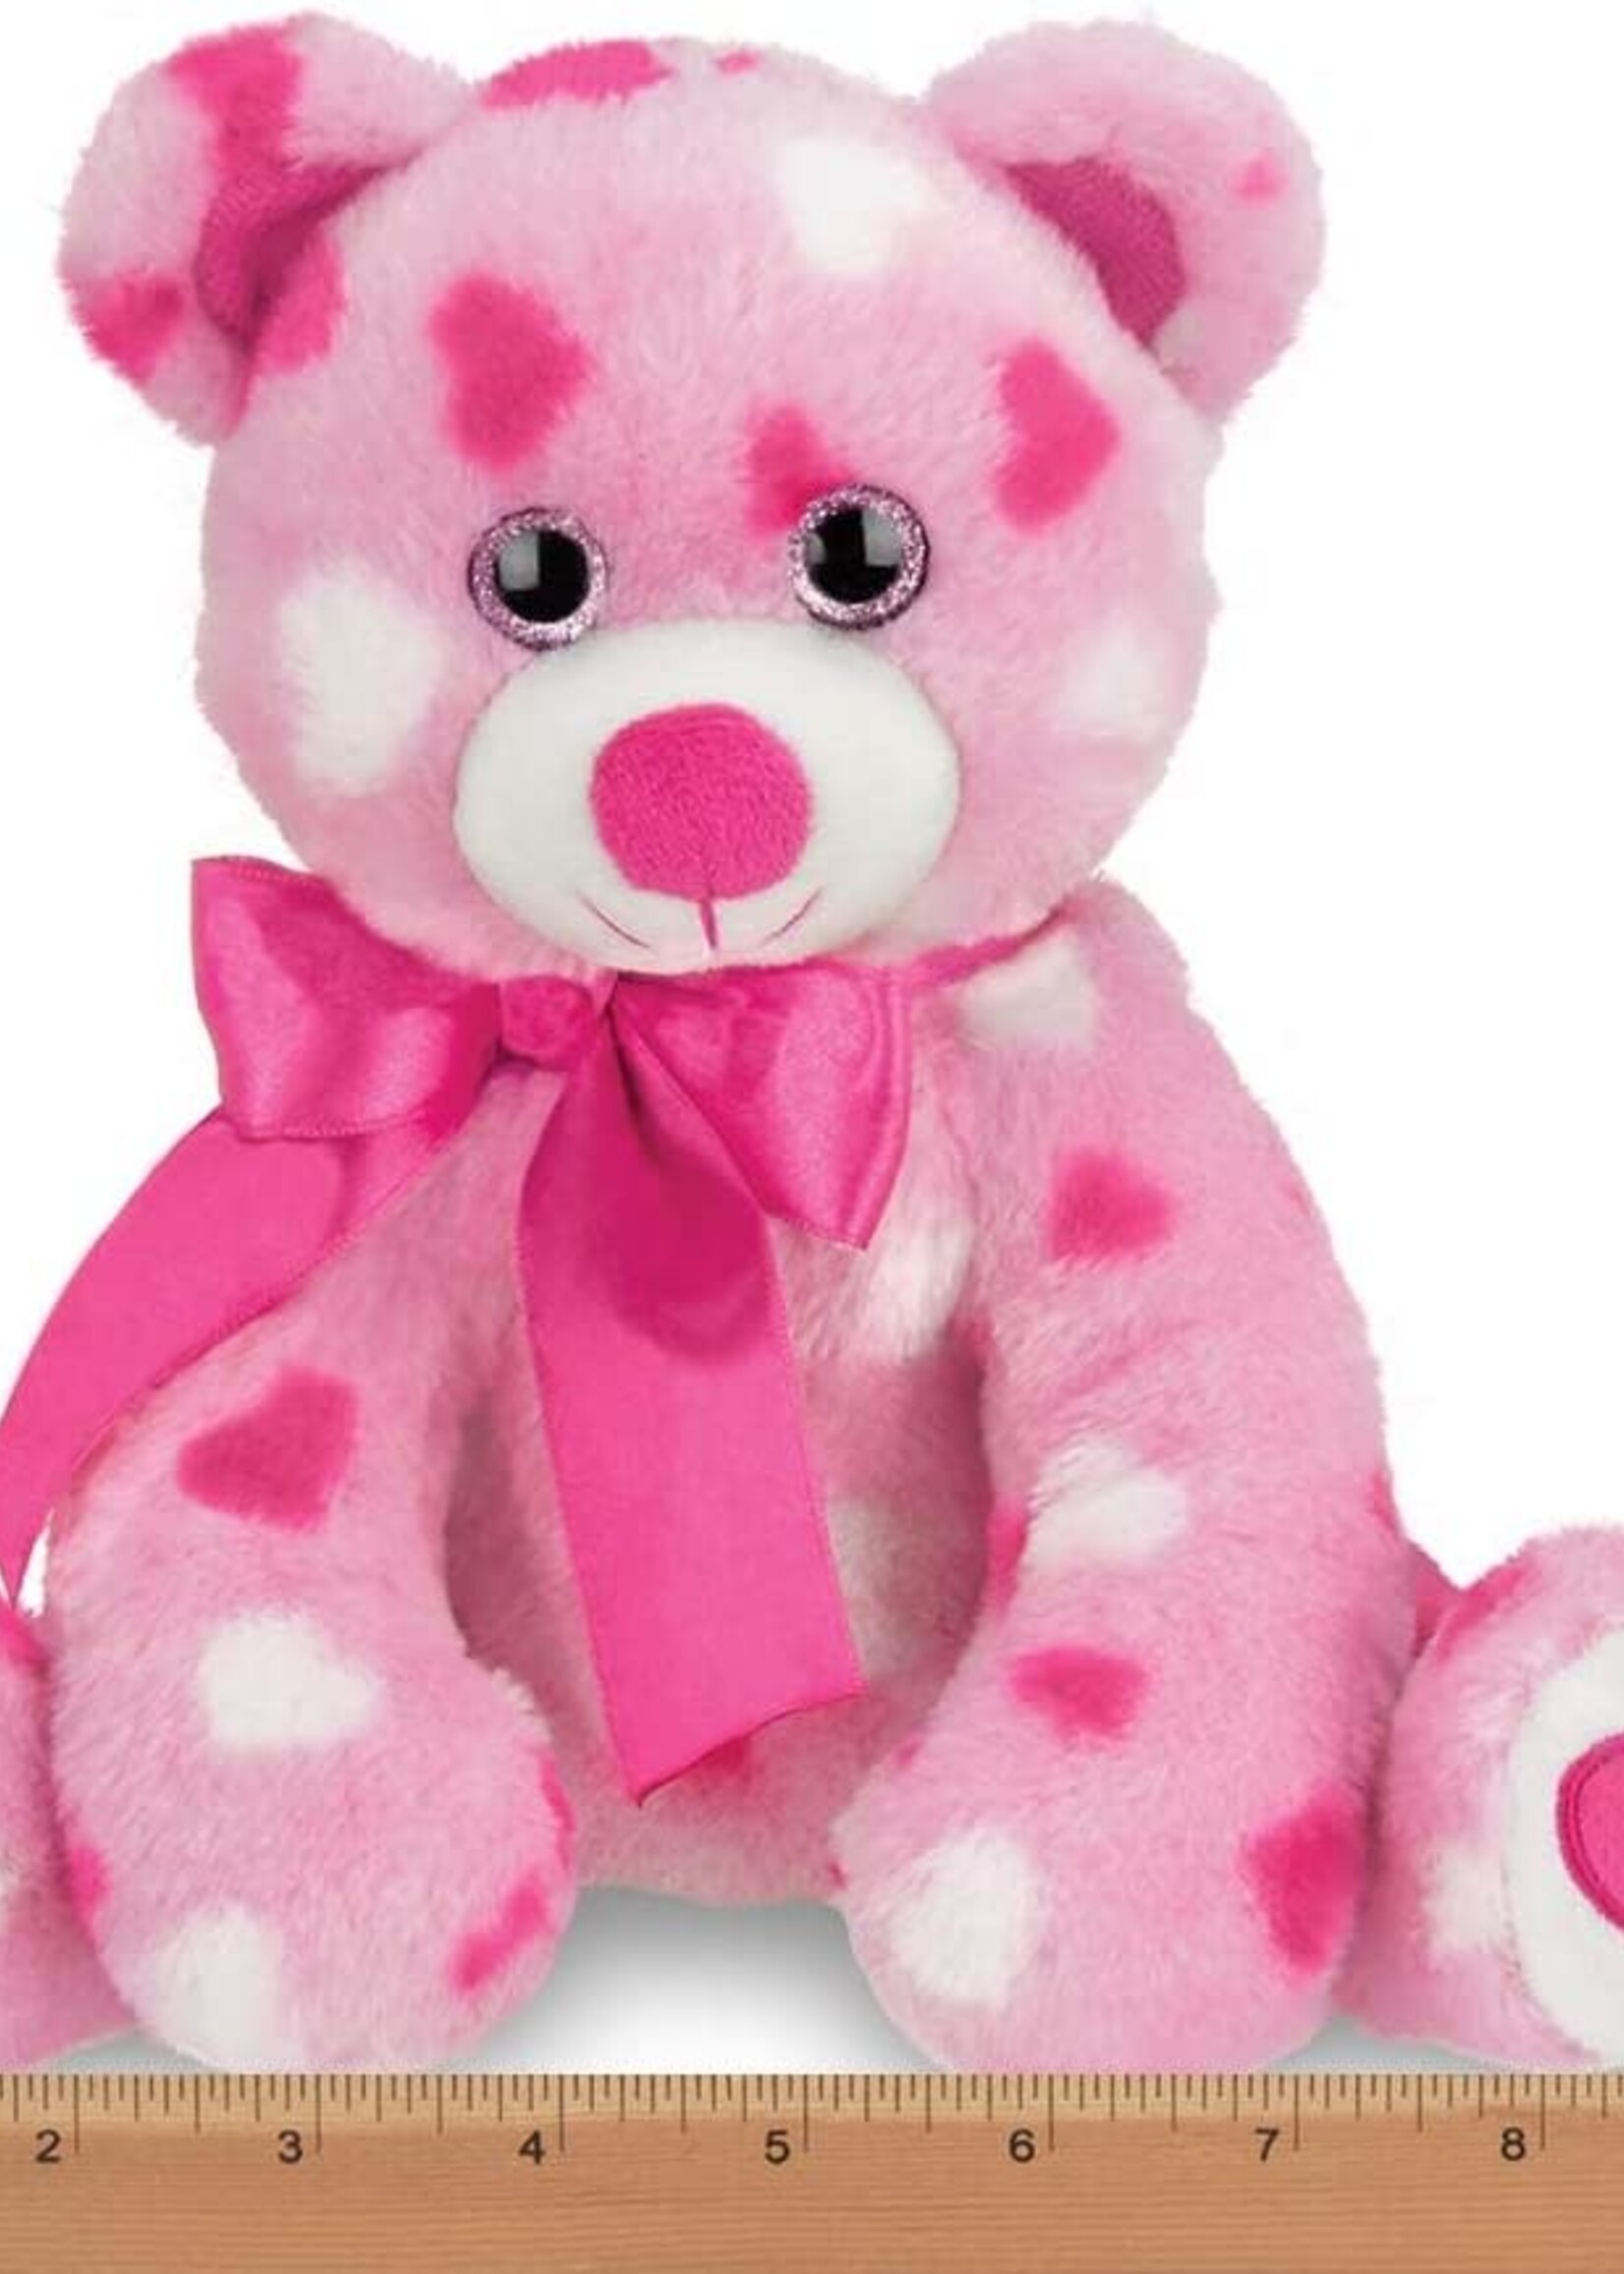 Pink Plush Stuffed Animal Teddy Bear with Hearts, 8.5 inches